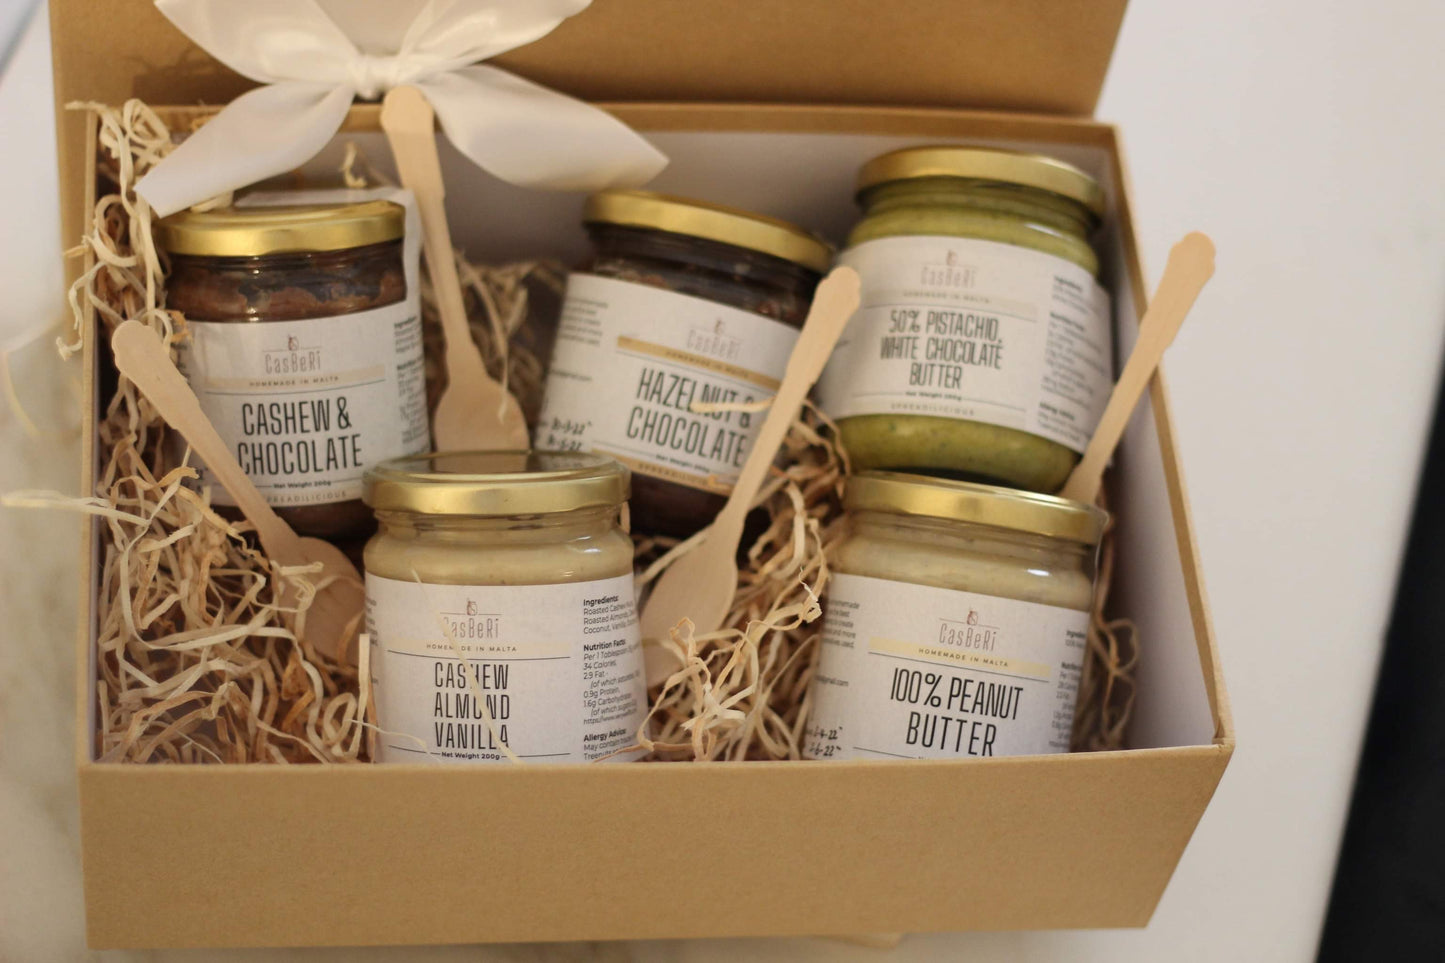 The Nut Butter Box